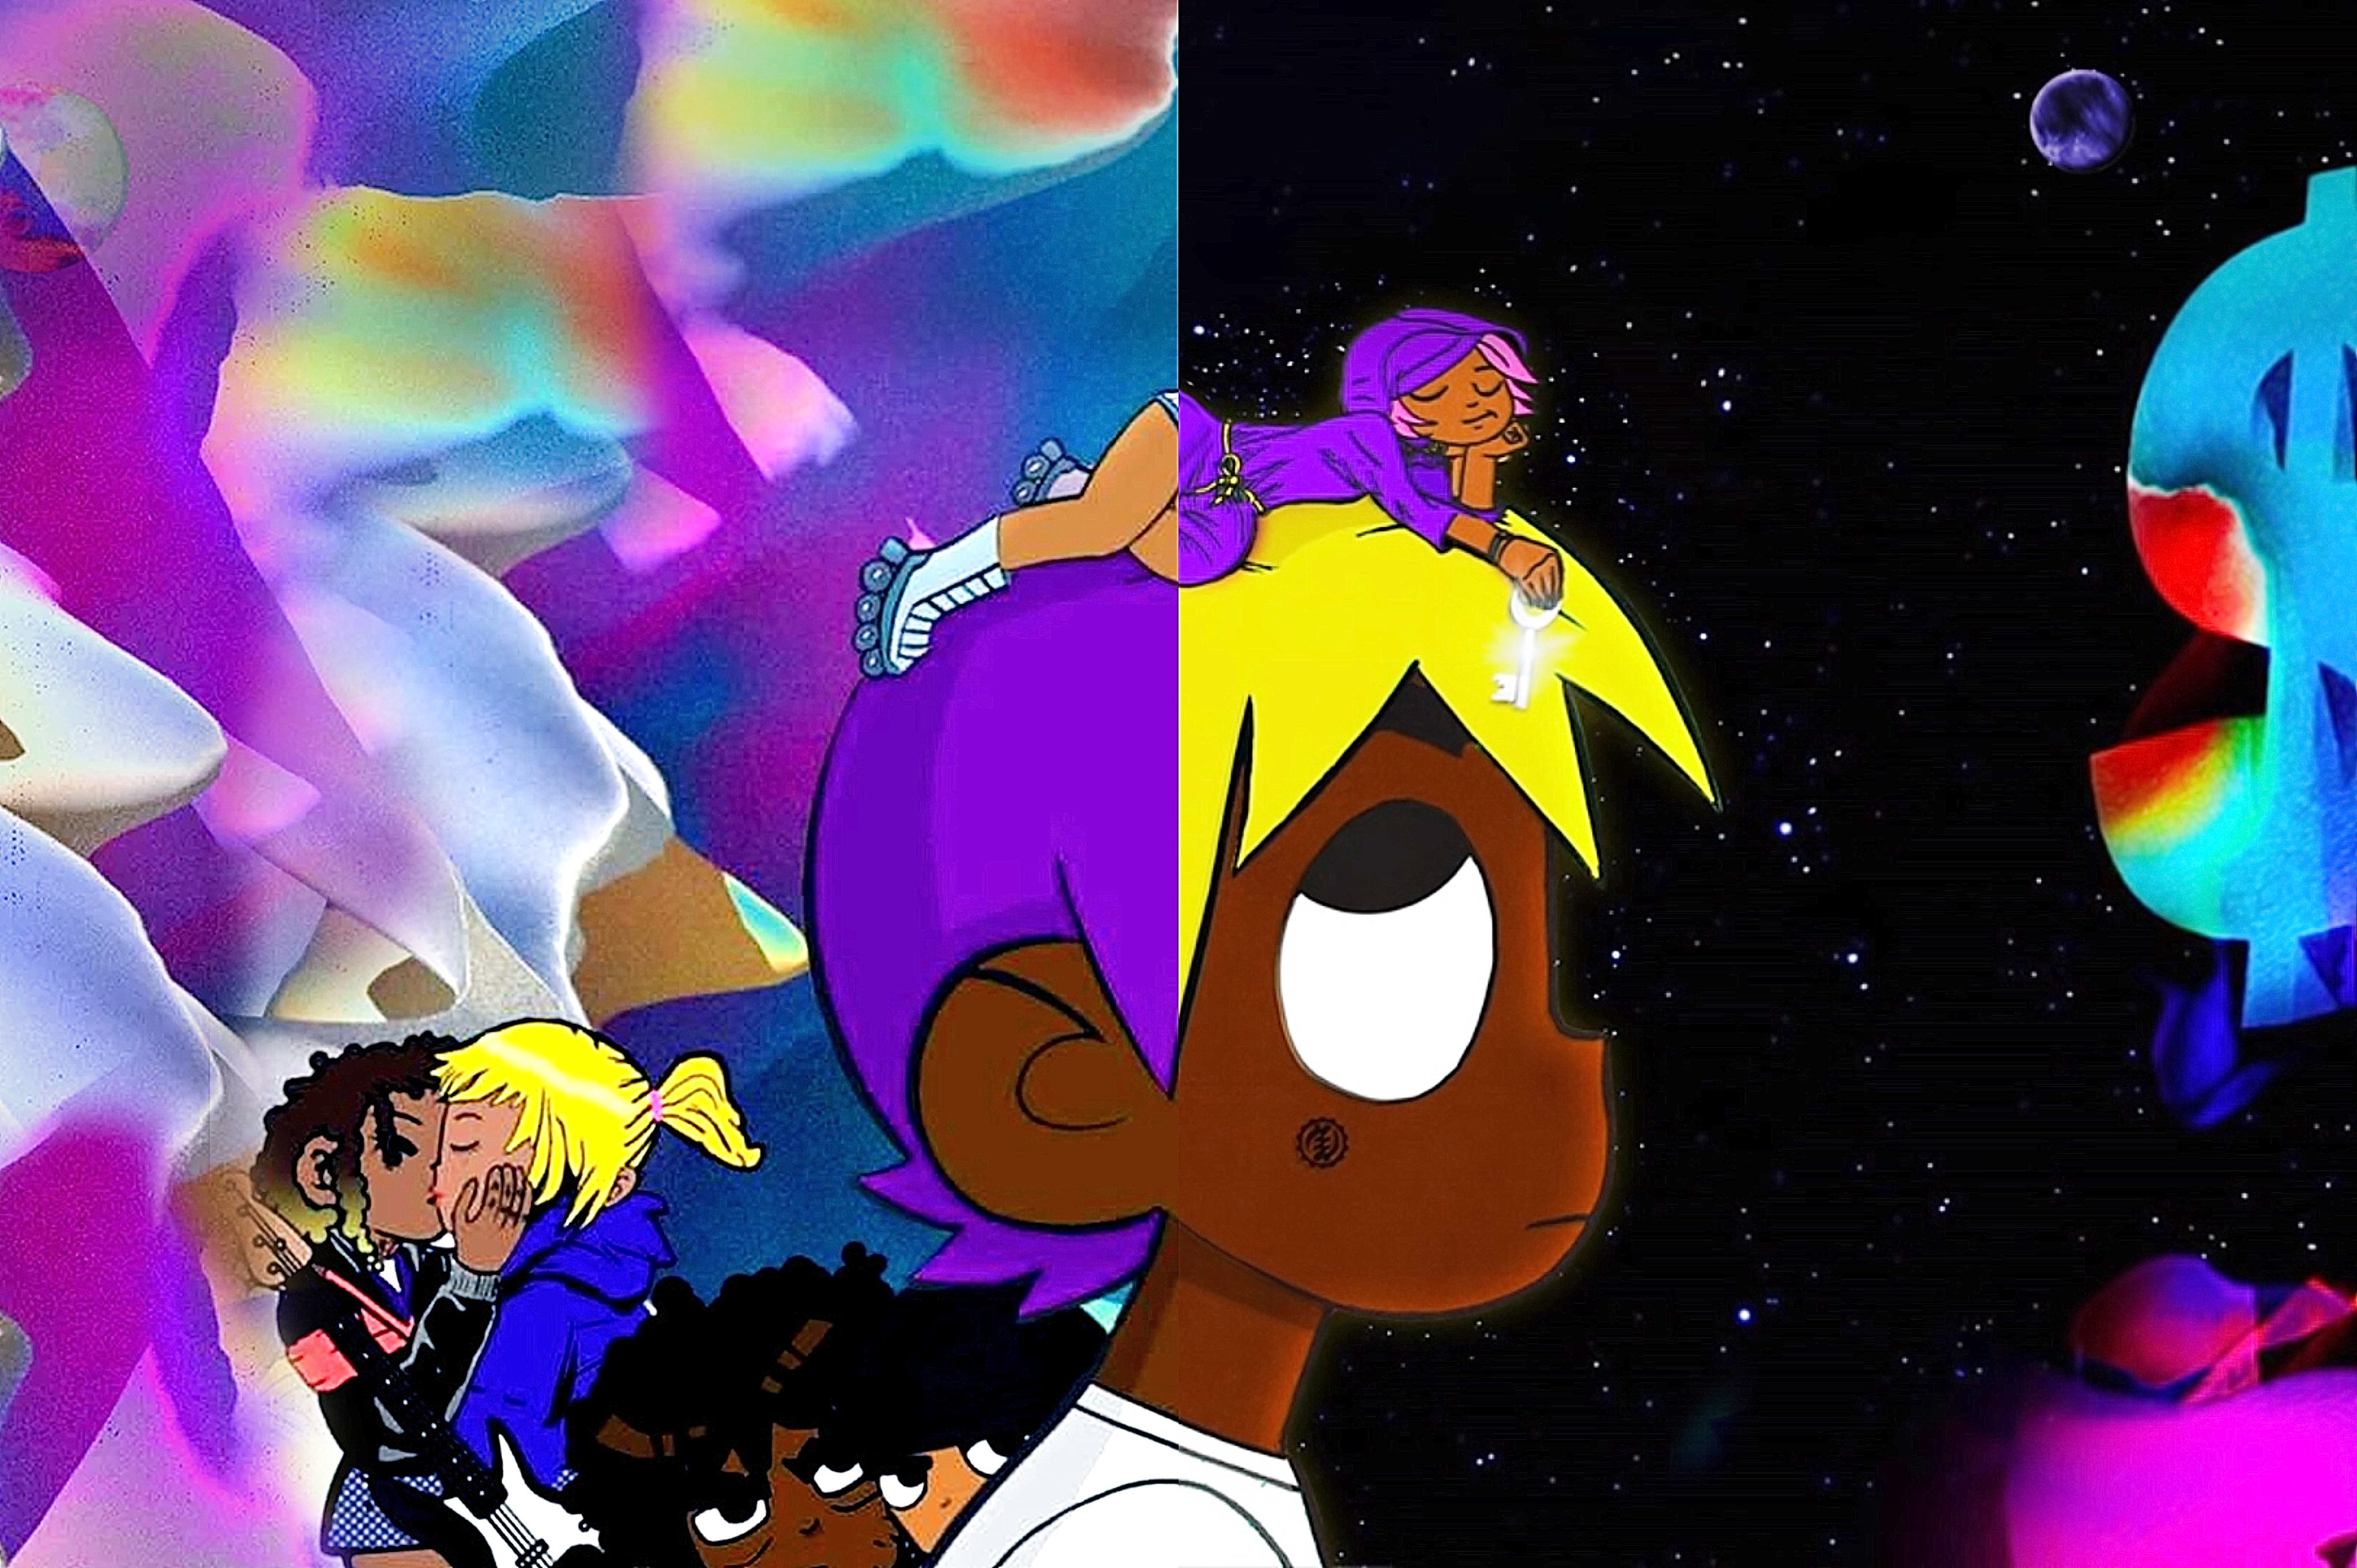 Eternal Atake How Lil Uzi Vert Almost Released The Greatest Rap Album Of All Time But Decided